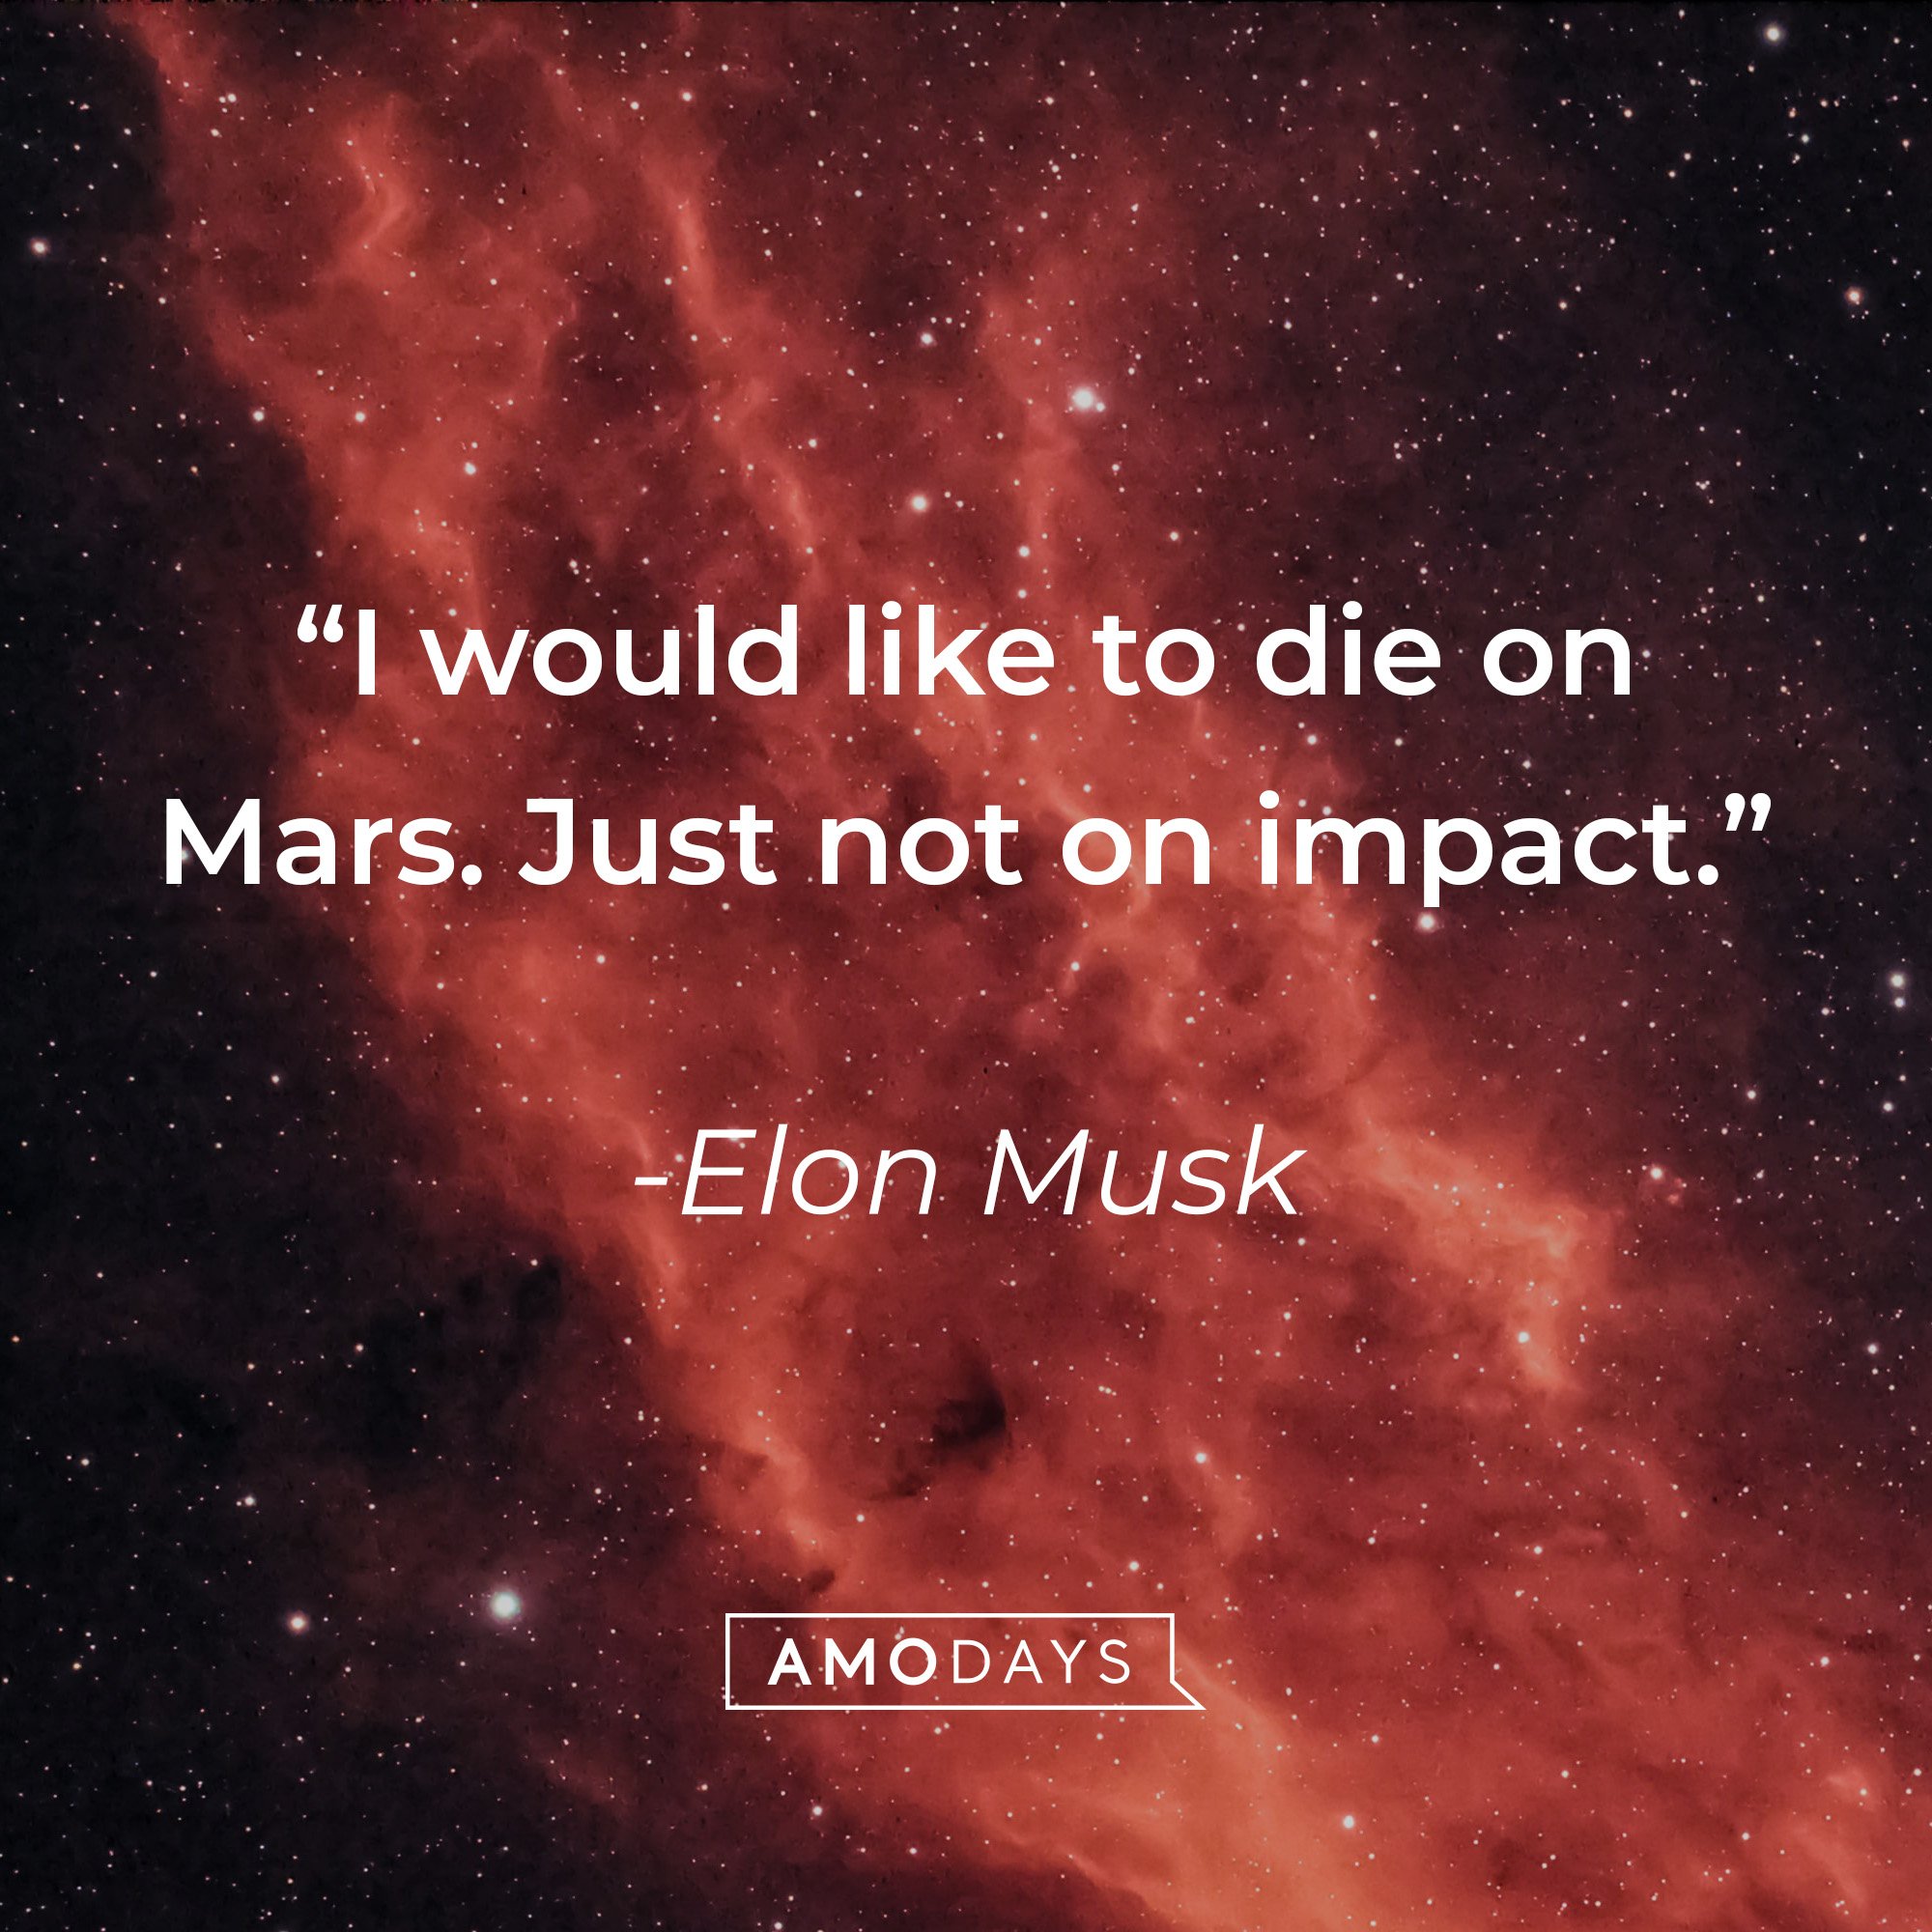 Elon Musk’s quote: “I would like to die on Mars. Just not on impact”. | Image: AmoDays